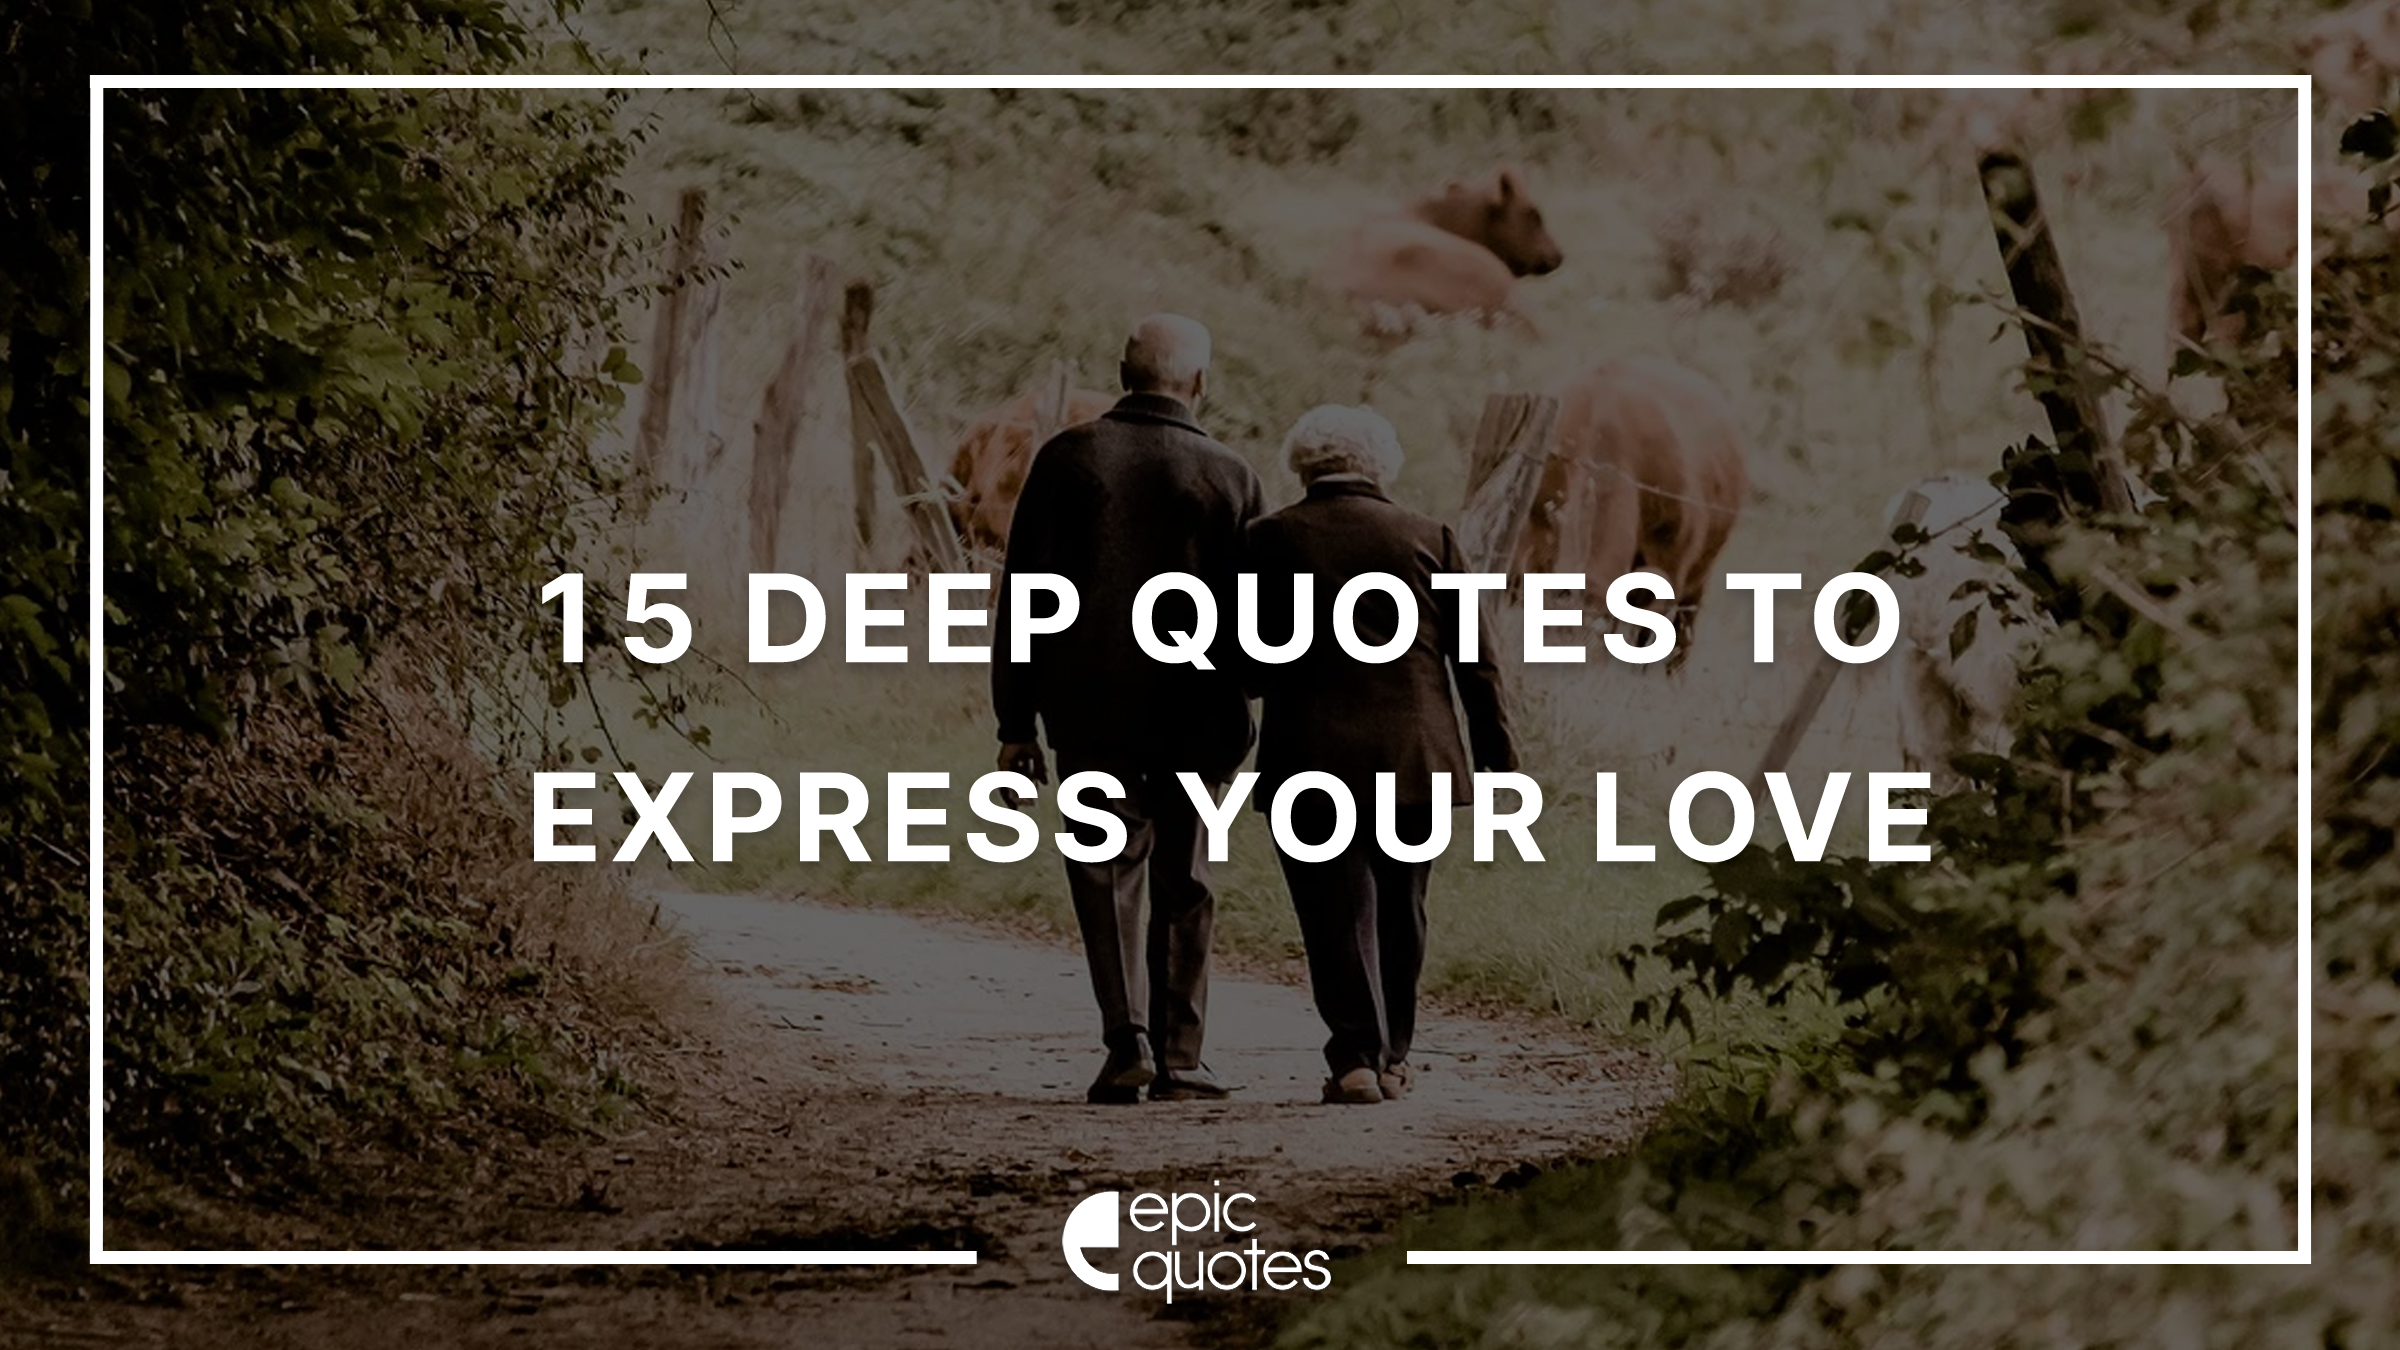 15 Deep Love Quotes to Express your Love and Feelings | Epic Quotes